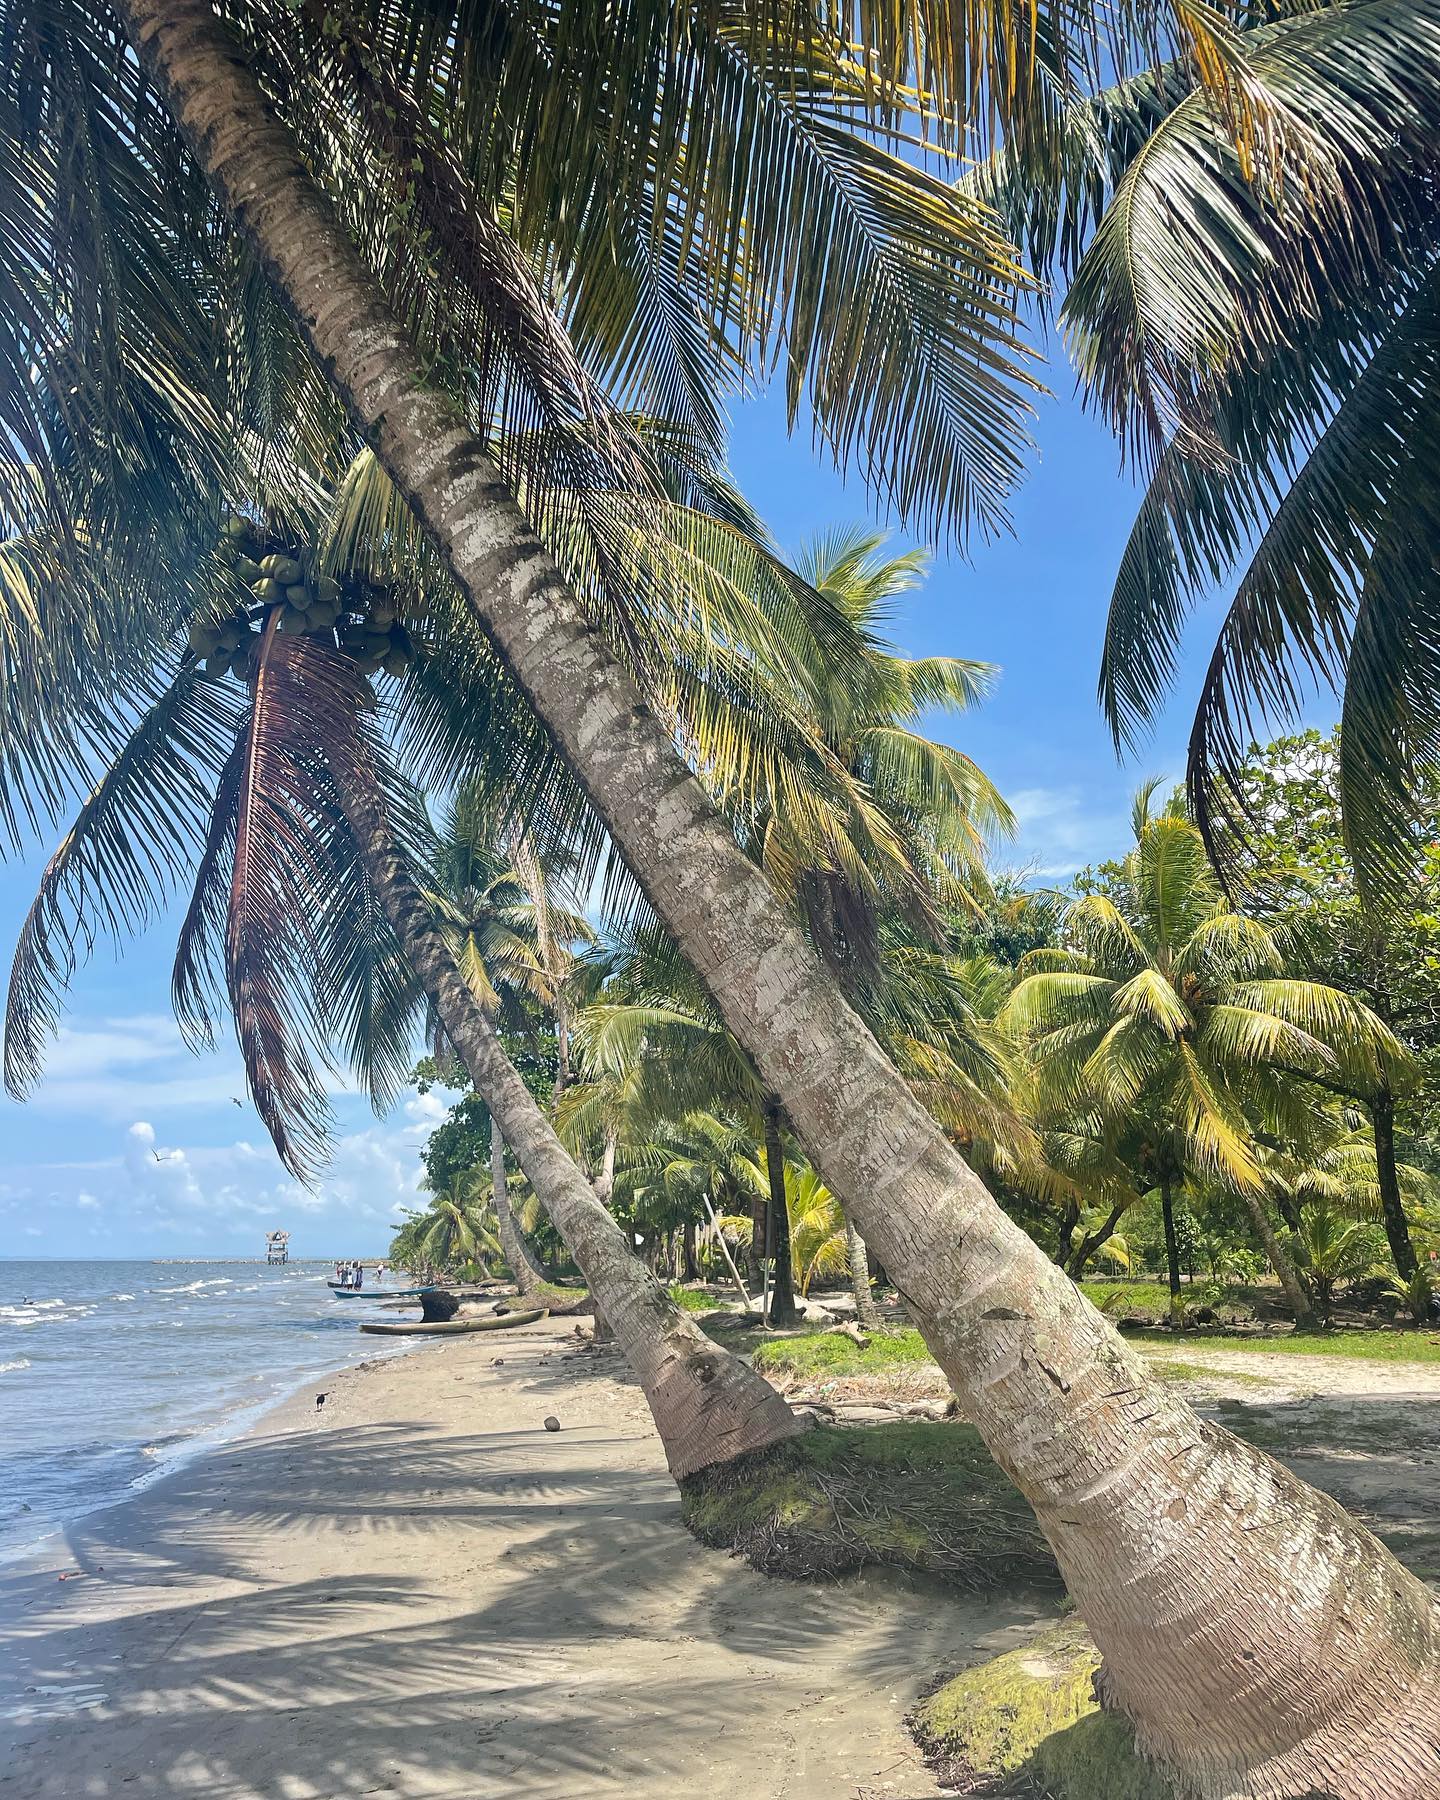 I really loved this local beach in Livingston (Guatemala) ! It’s not very nice to swim there. But for a beach walk it’s an amazing beach because you see fisherman, birds, pelicans, ducks chasing me 😂 many palmtrees, children that are helping their mom and dad with fishing etc etc 🤩 So this beach has an amazing local life! 
First I went with the tuk tuk from the town of Livingston to the beginning of the walking path that goes to this beach. 
I walked almost to the end of this beach to visit the “Los Siete Altares” there are many pools to relax and a few nice waterfalls. There was 1 waterfall with a nice pool where I was alone the most of the time for hours! 🥰😍

#guatemalaimpresionante #livingstonguatemala #worldtrip #beachlife #lovetotravel #backpackinglife #palmtrees🌴 #beachfinds #guatemalatravel #wereldreis #rumagtravel #nofilterneeded #summerlife #guatephoto #reiswijven #wanderluster #letswander #womanwhotravel #thetraveltag #shetravelz #featurefriday #featurefridays #stayandwanderer #amazing_terra #capturethemoment